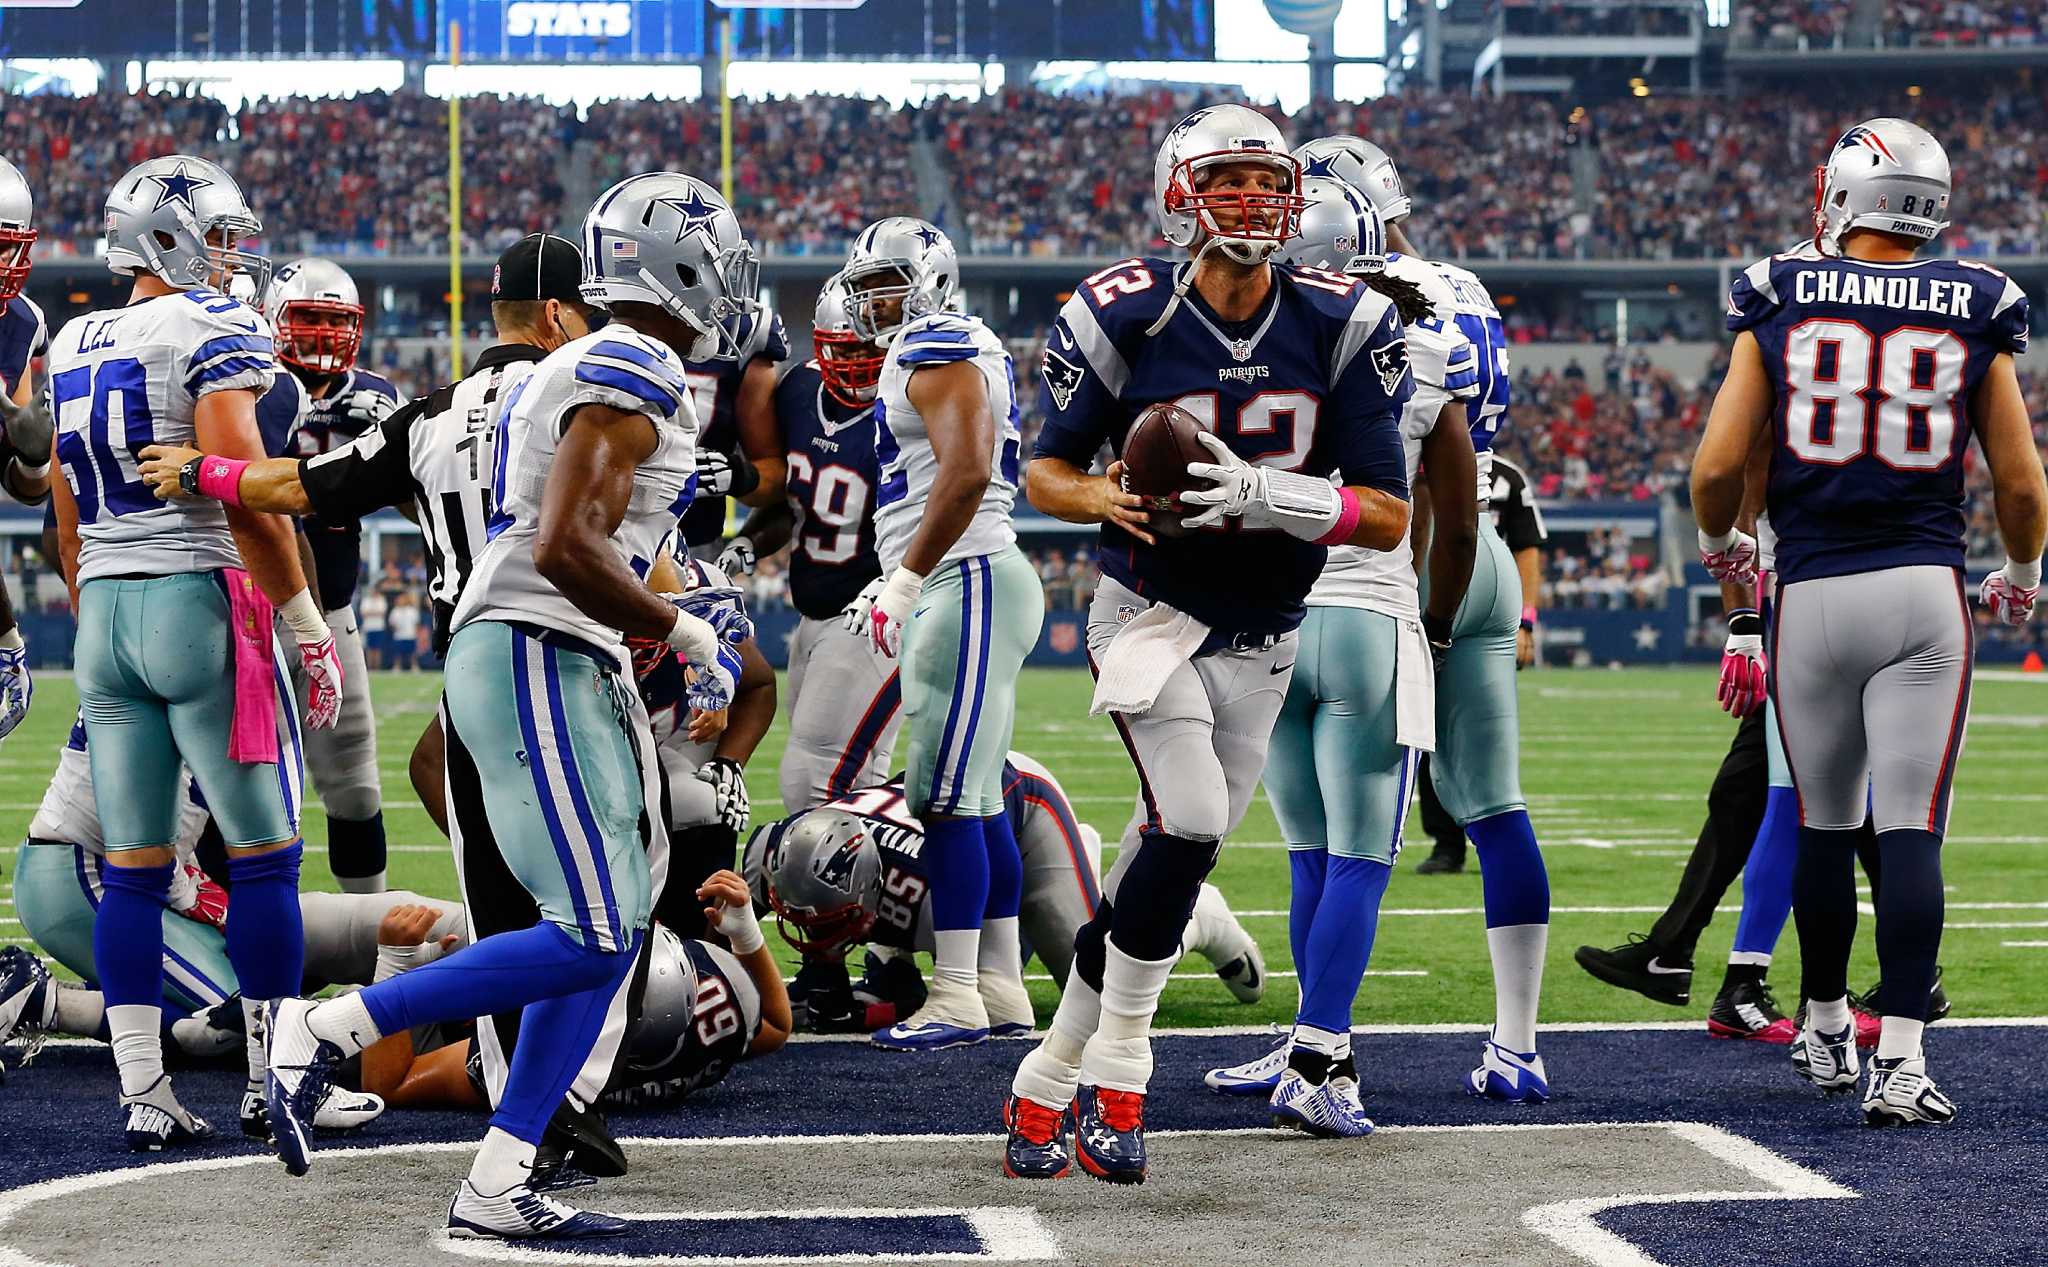 Expect Cowboys to challenge Patriots in next Super Bowl